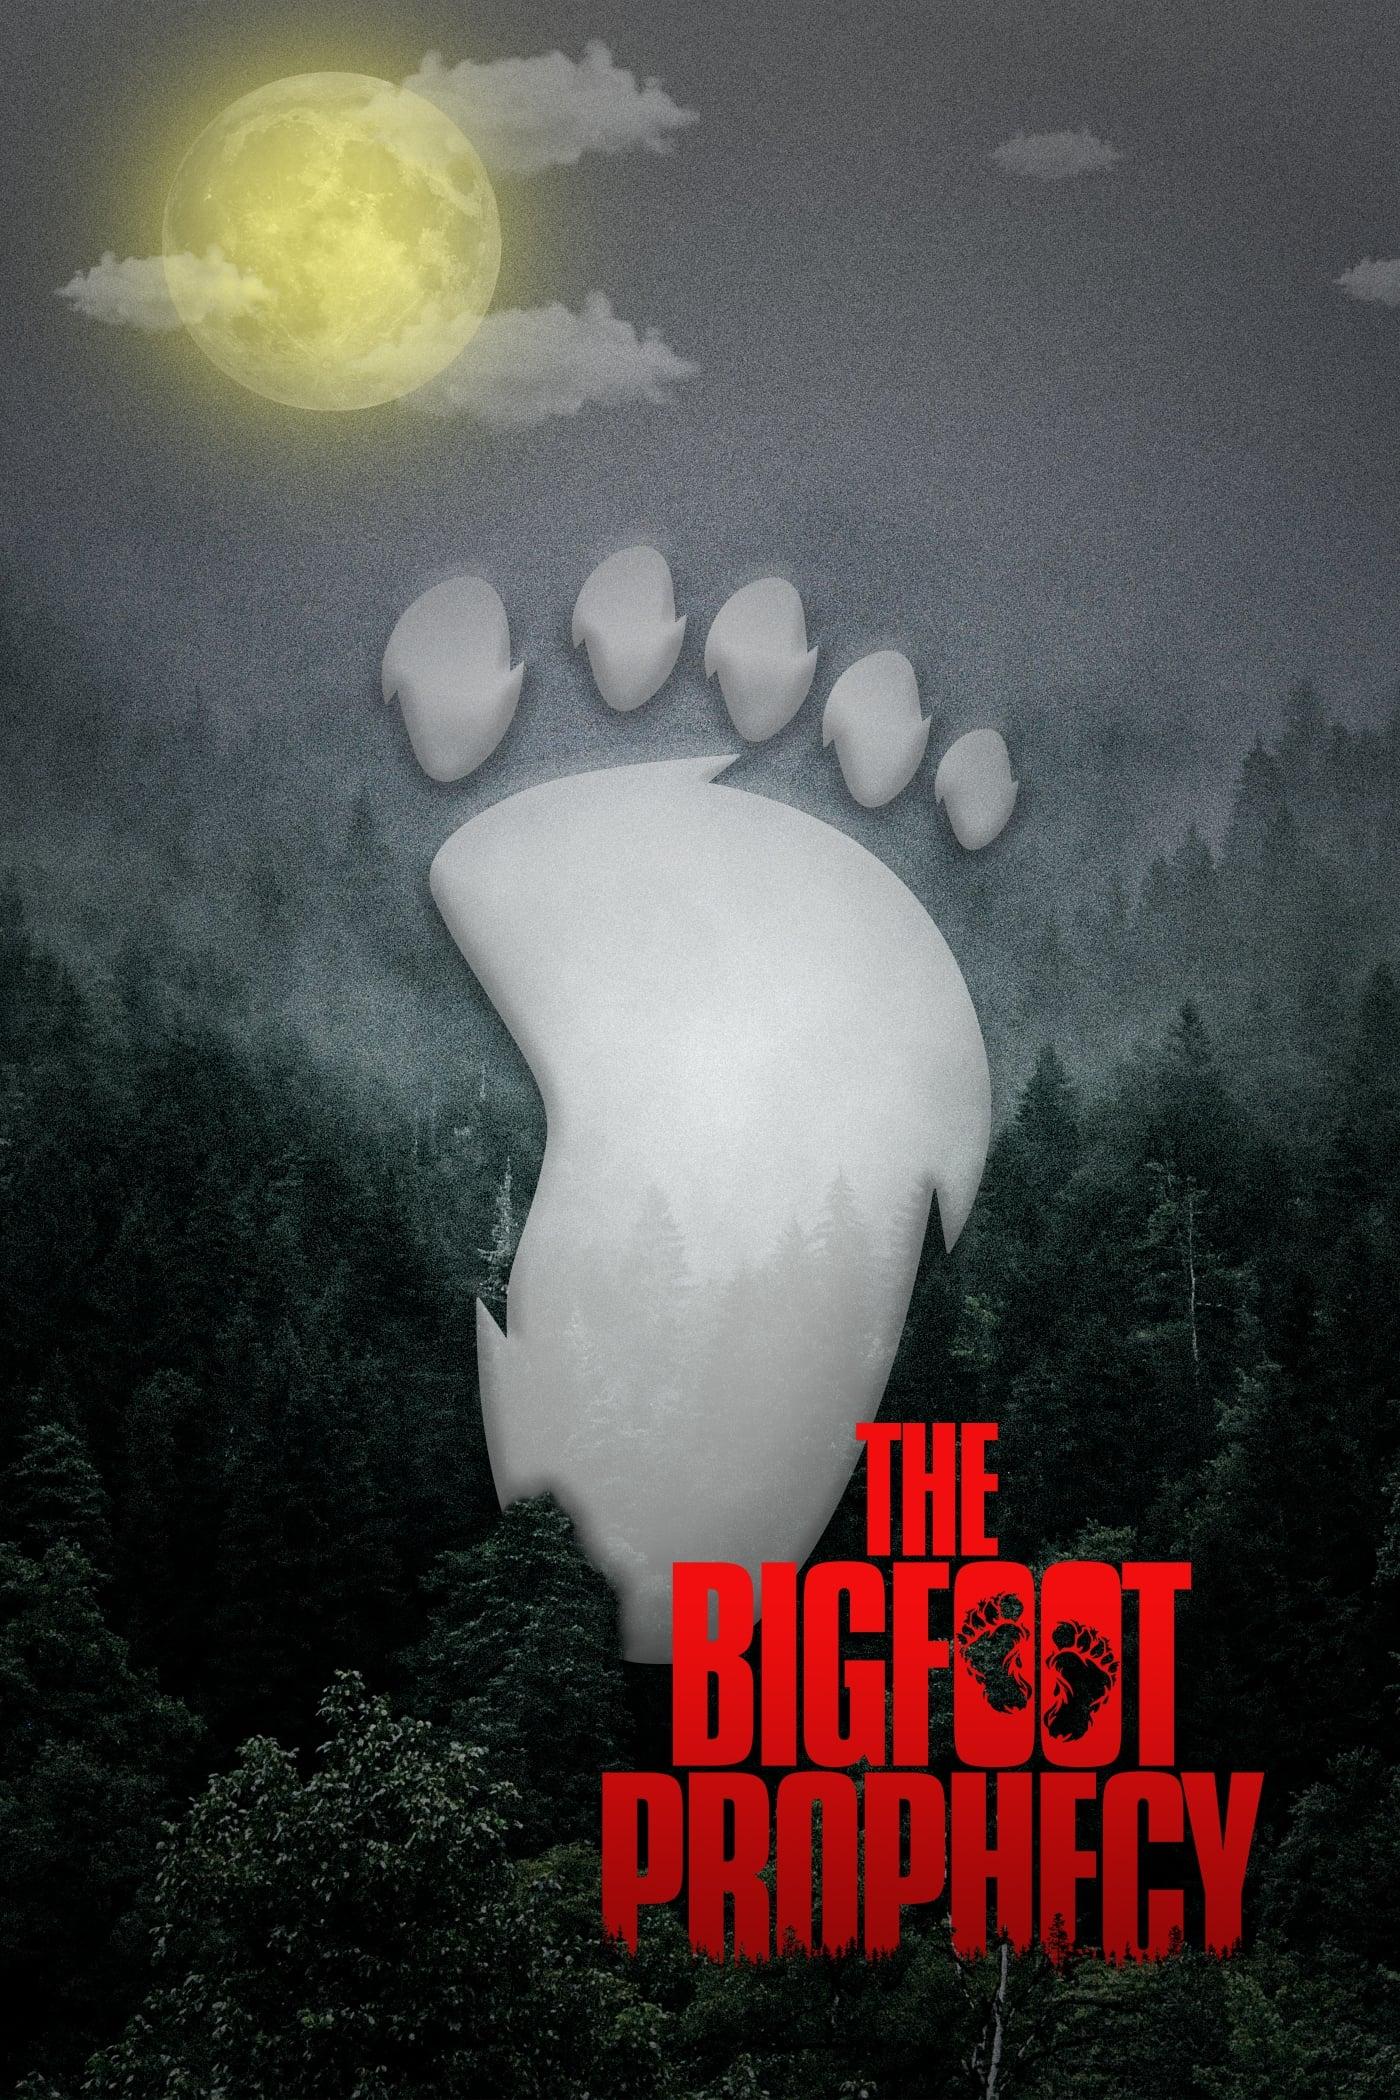 The bigfoot prophecy poster